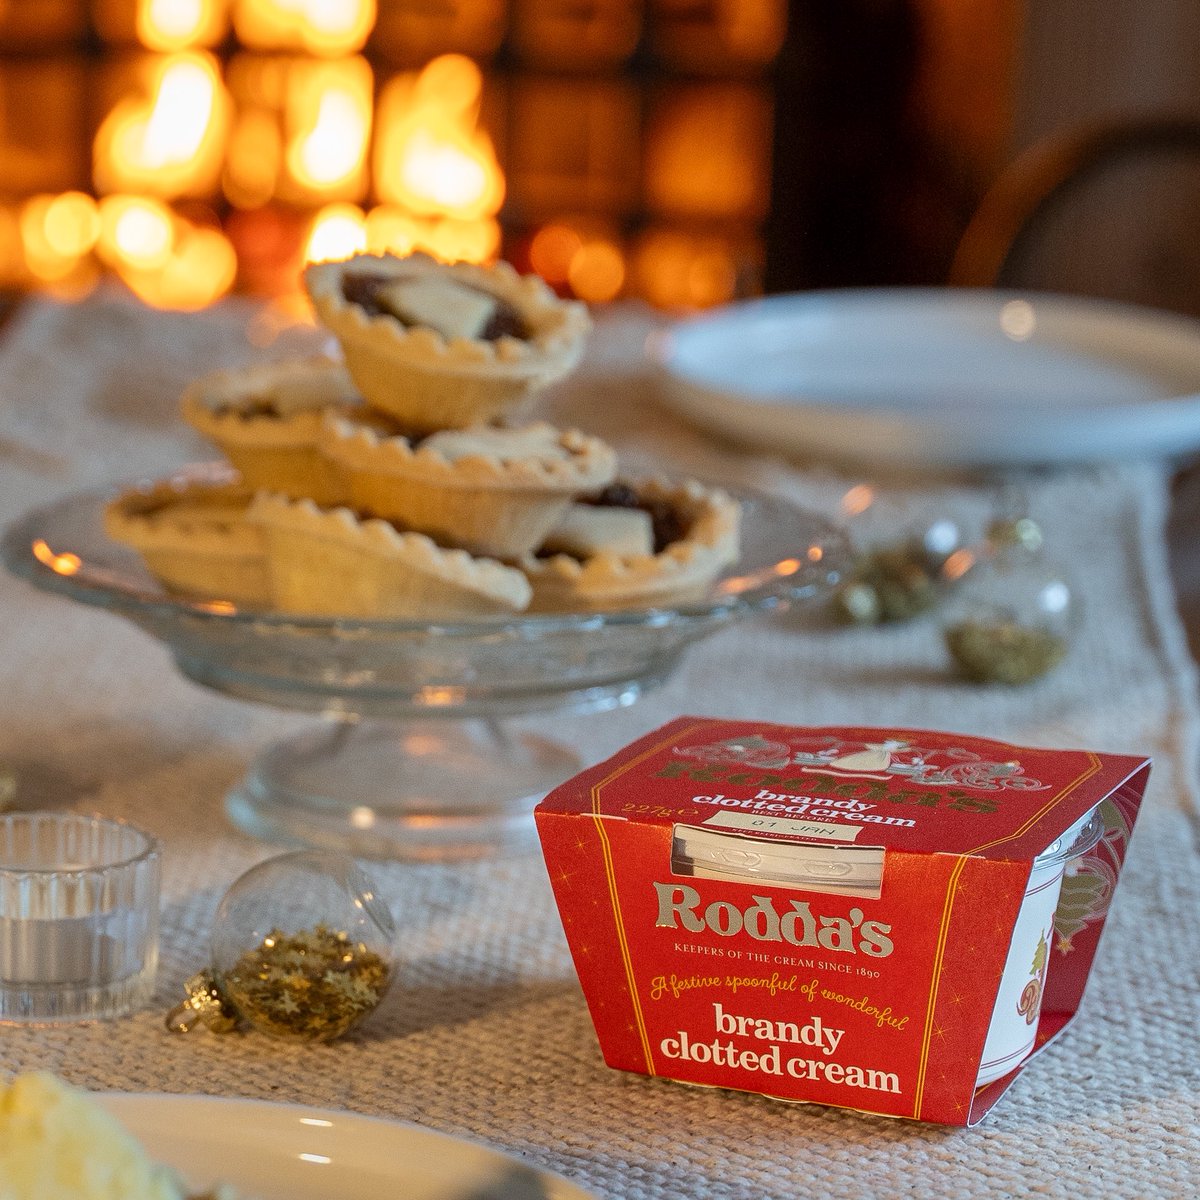 With lots of excuses to enjoy mince pies anytime of the day or week this year, why not top yours with a #spoonfulofwonderful Rodda’s #brandyclottedcream Pick up a pot on your next shop and make your mince pies magical.